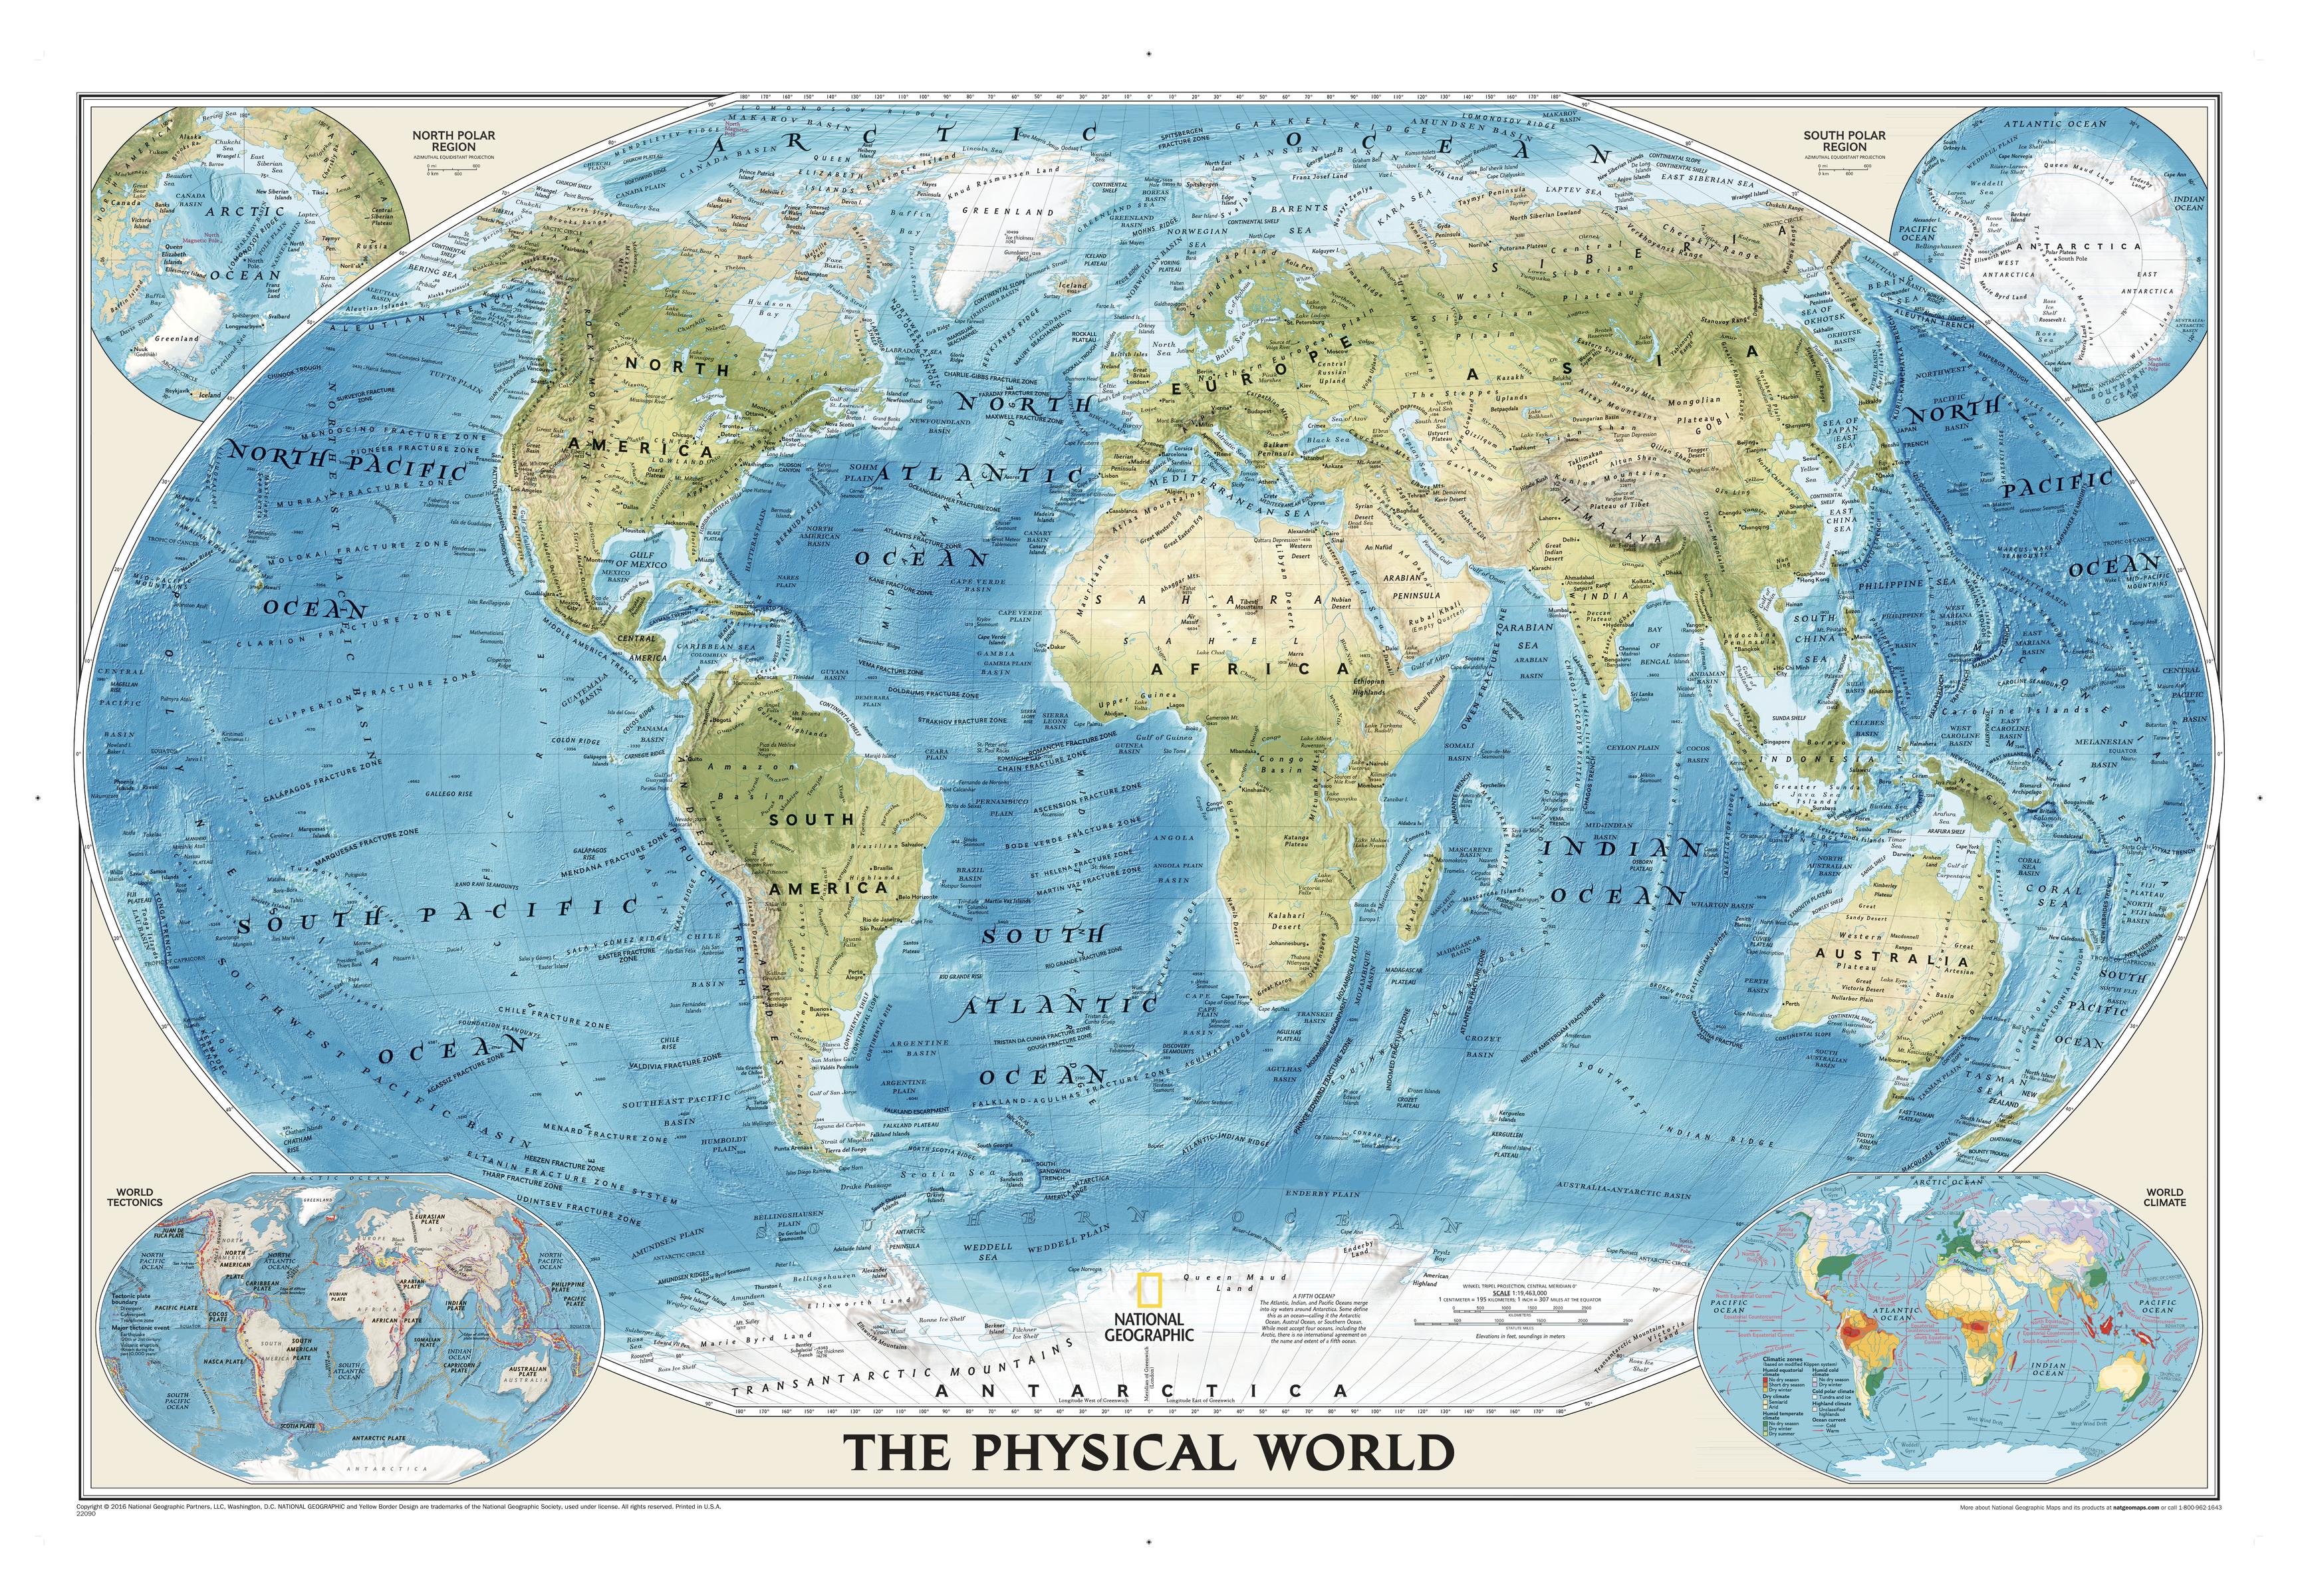 World Physical Large Wall Map by National Geographic (2009)